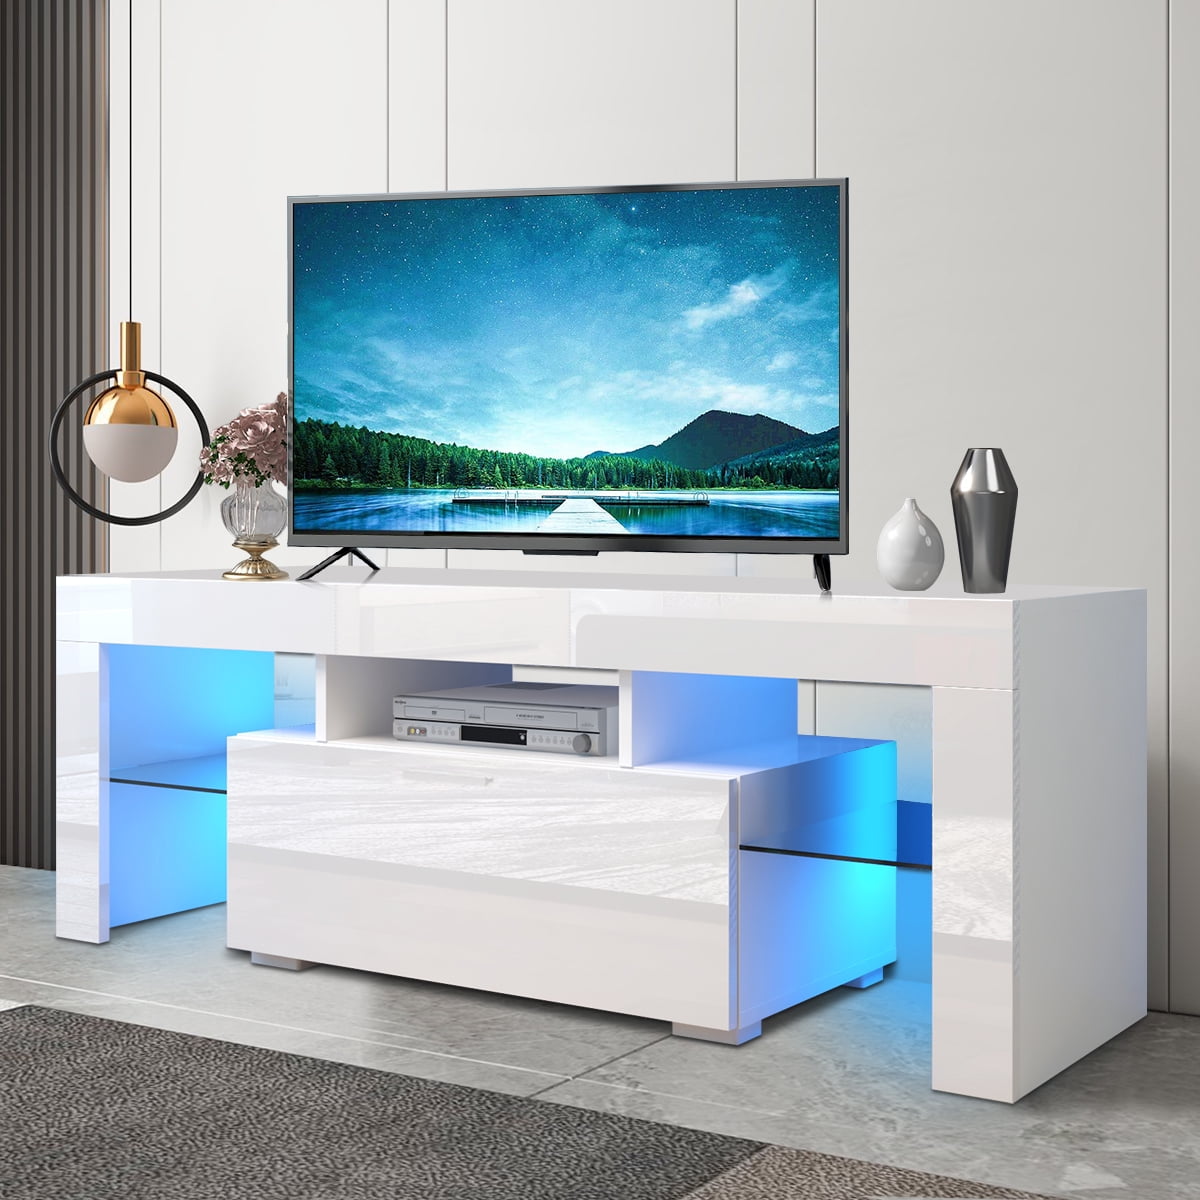 LIMA HIGH GLOSS PLASMA TV STAND CABINET ENTERTAINMENT UNIT SUITABLE UP TO 55” White